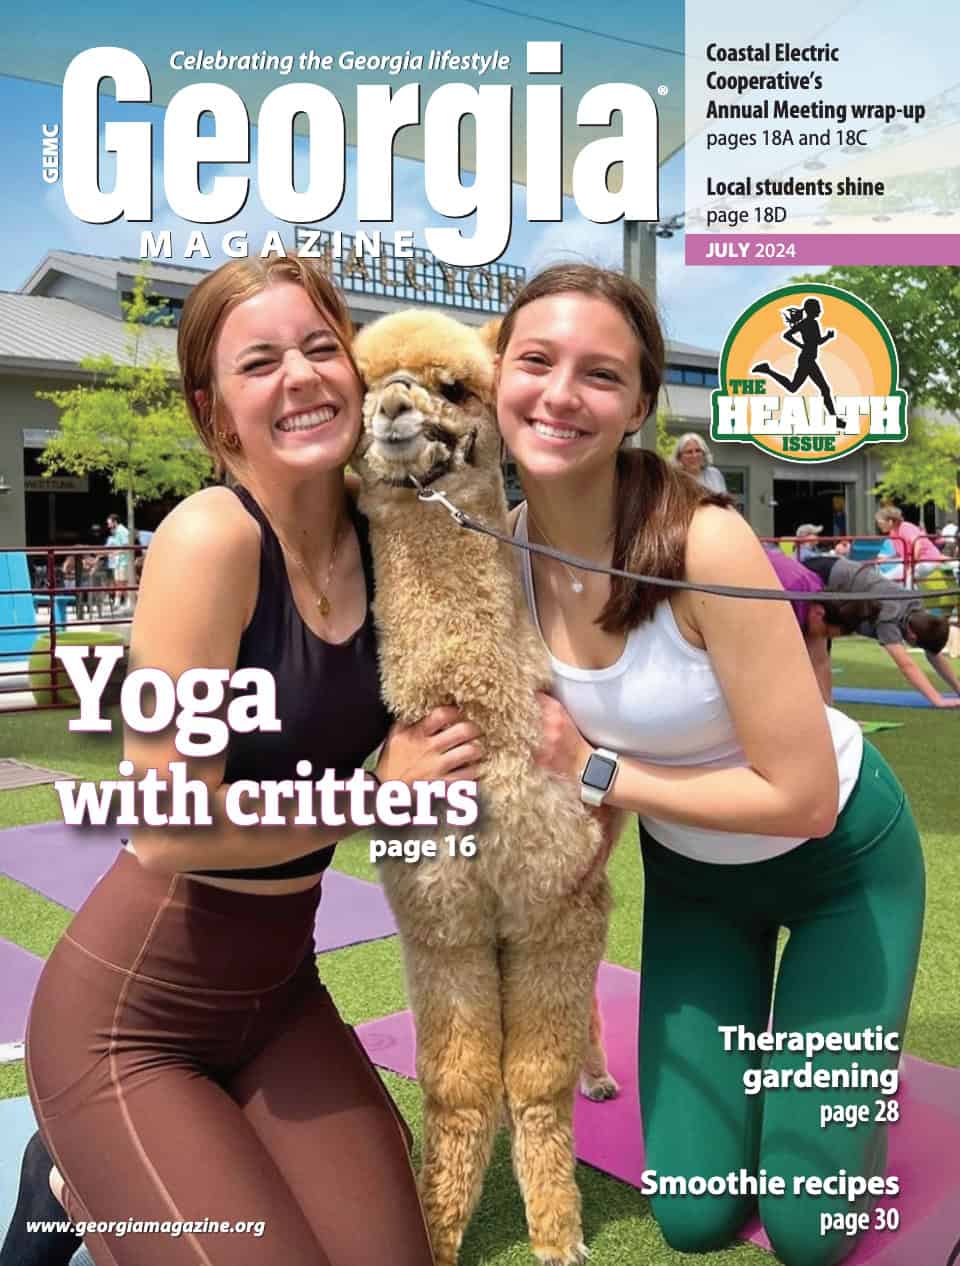 July 2024 Georgia Magazine cover features two female yoga participants enjoying a snuggle with Coco the alpaca during a Farm Animal Yoga on the green event.